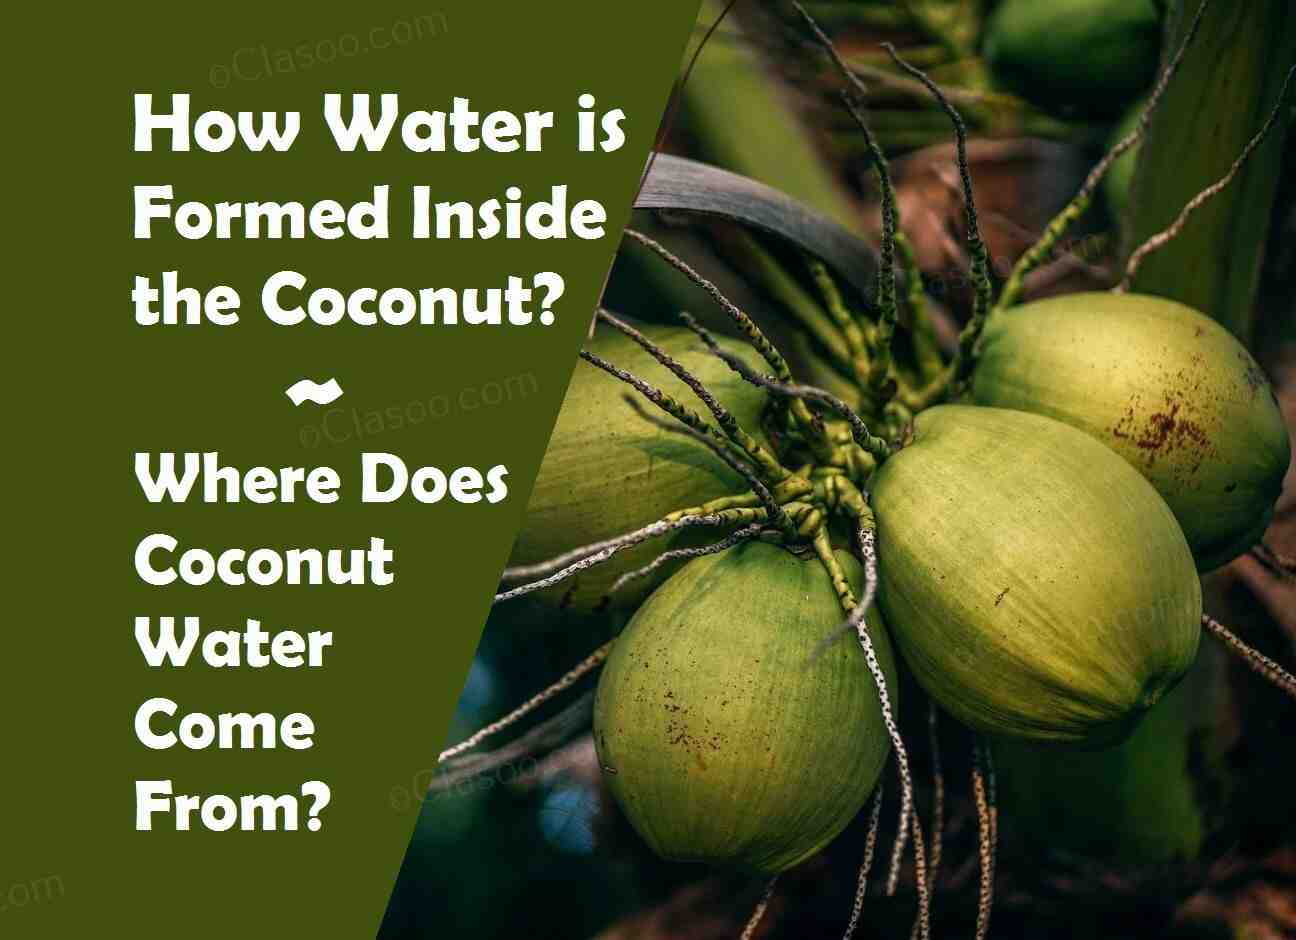 How does water go inside coconut?